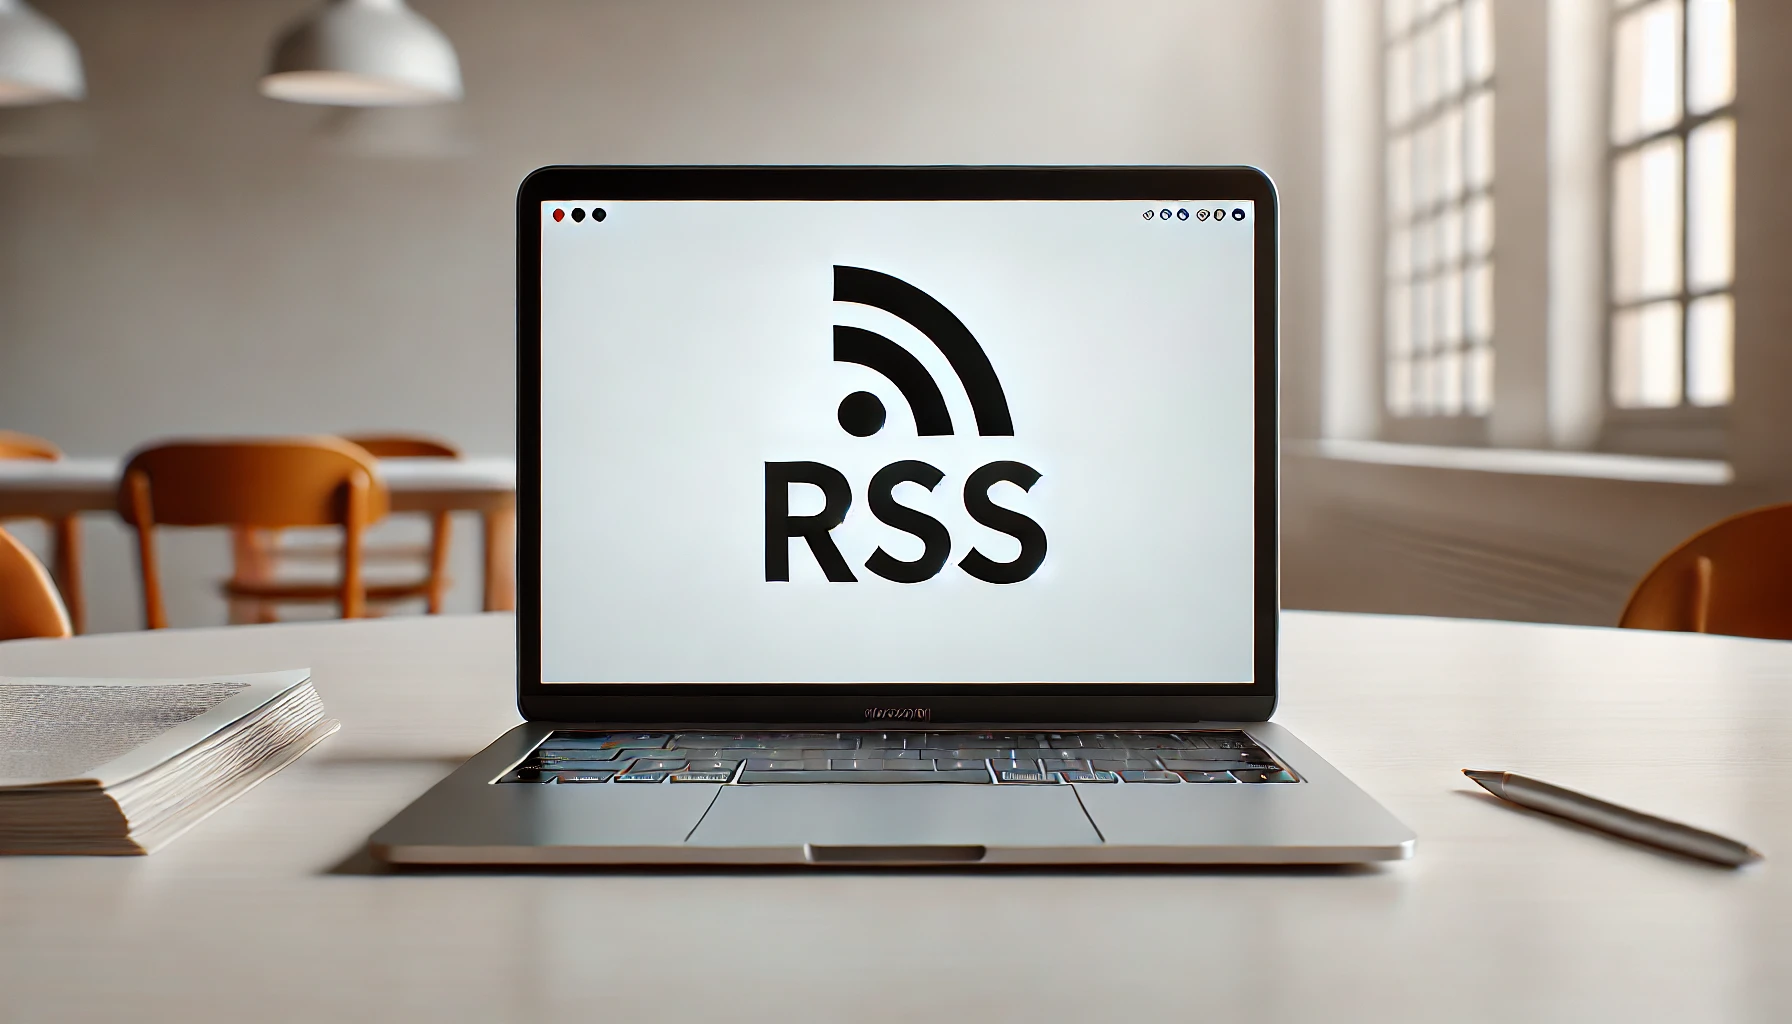 https://www.brilliantdirectories.com/blog/5-must-have-rss-readers-to-increase-your-traffic-with-irresistible-curated-content